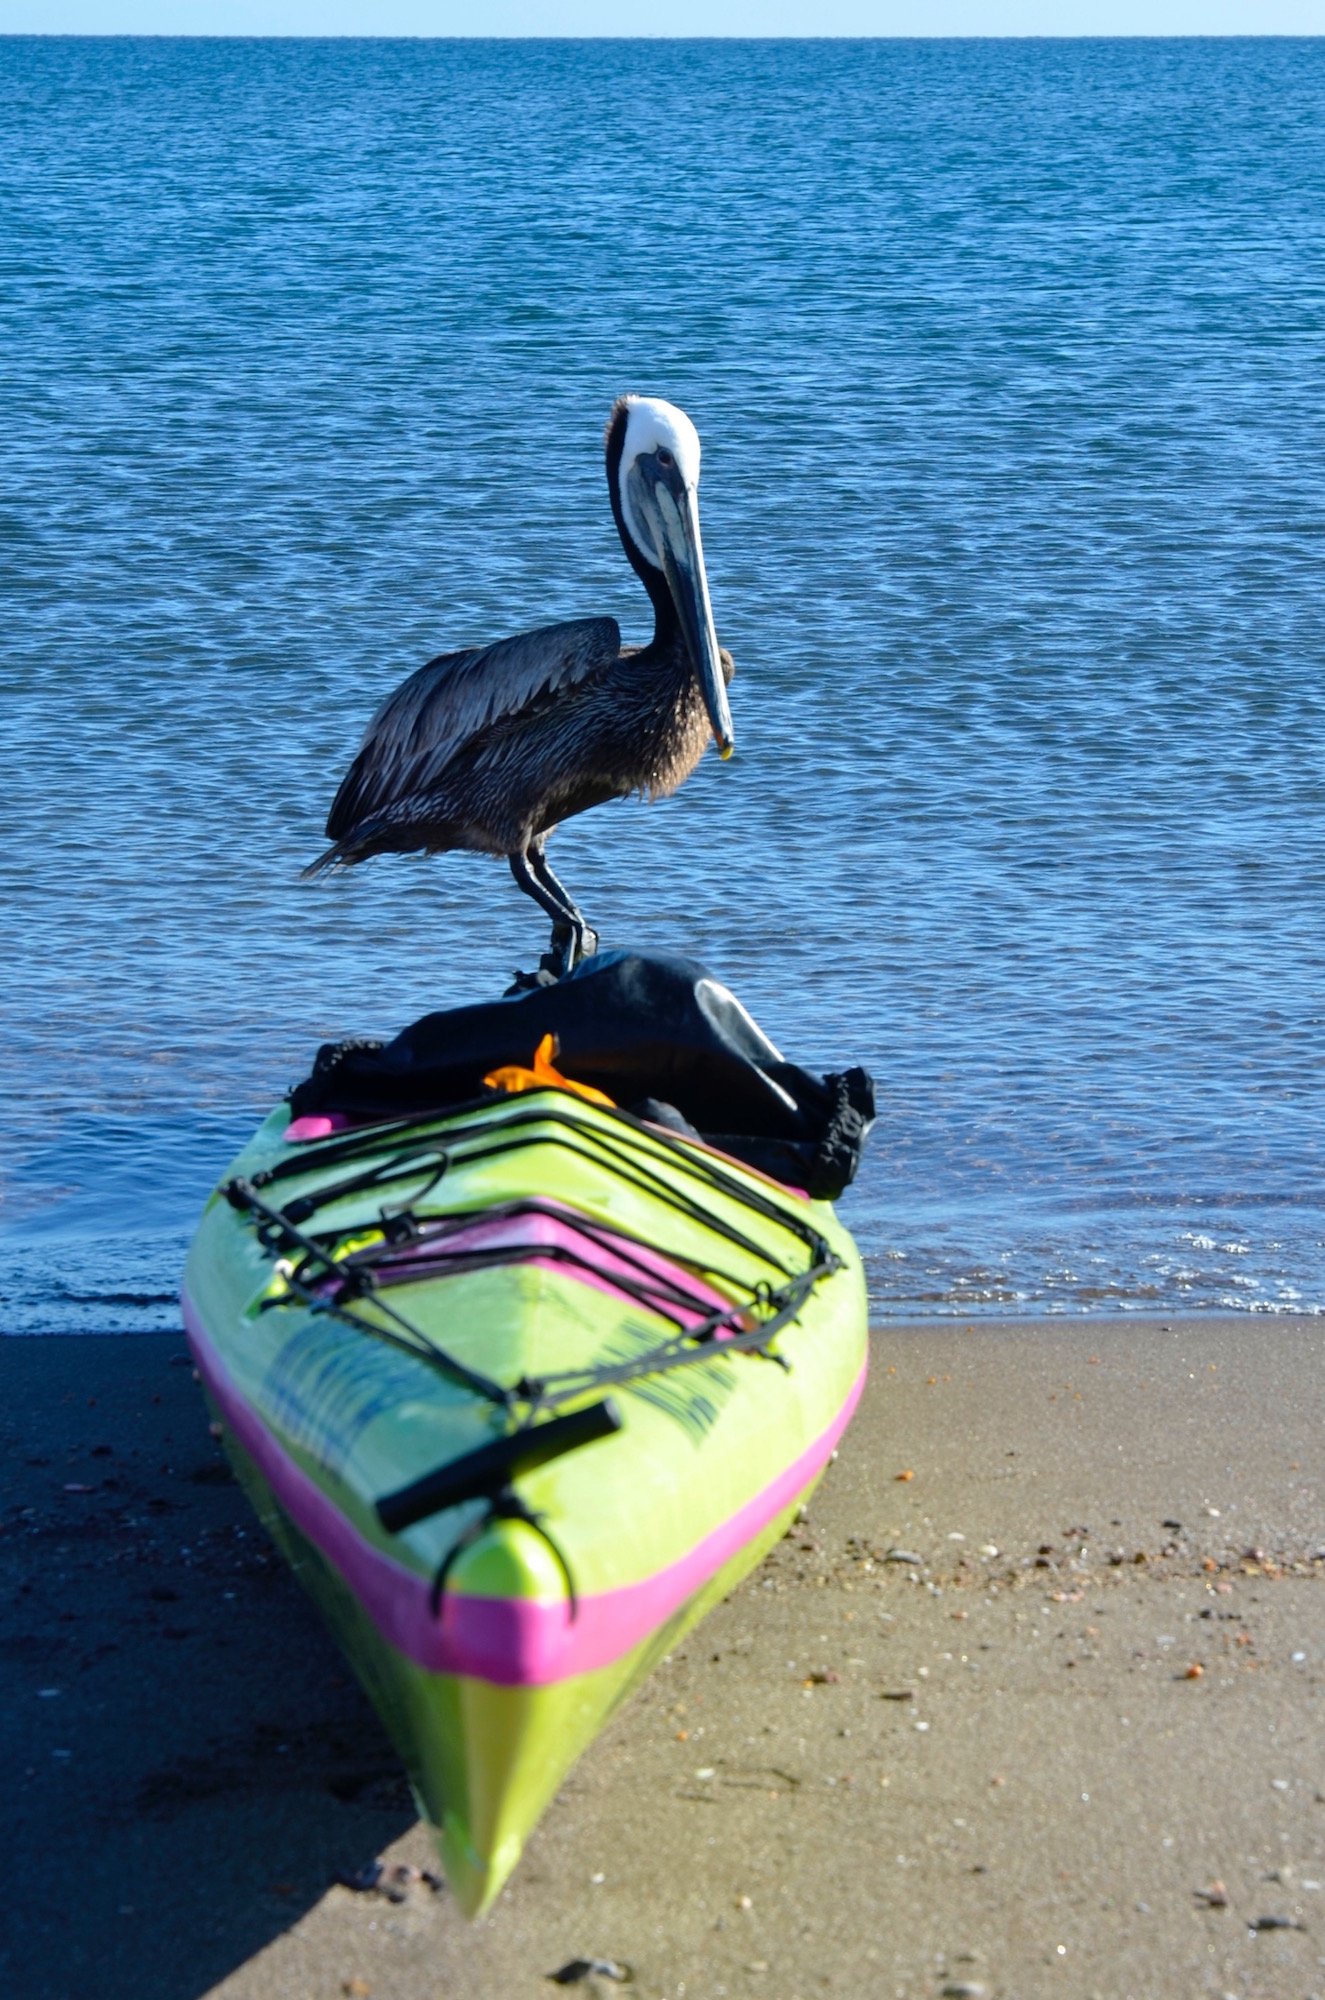 Pelican perched on top of a sea kayak